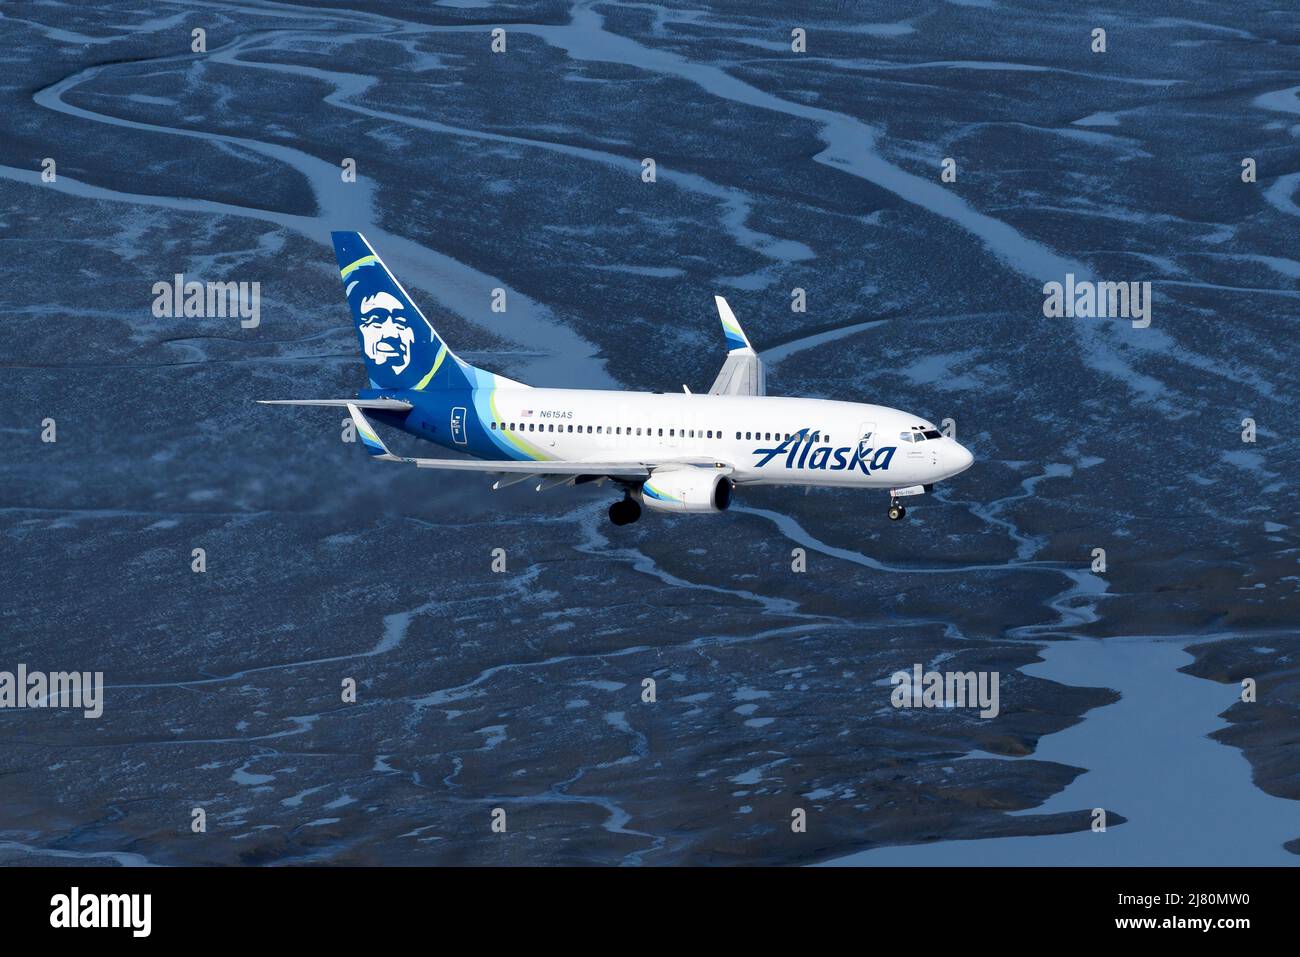 Alaska Airlines Boeing 737 airplane from above. Aircraft of Alaska Airlines aerial view over water. 737-700 plane. Stock Photo